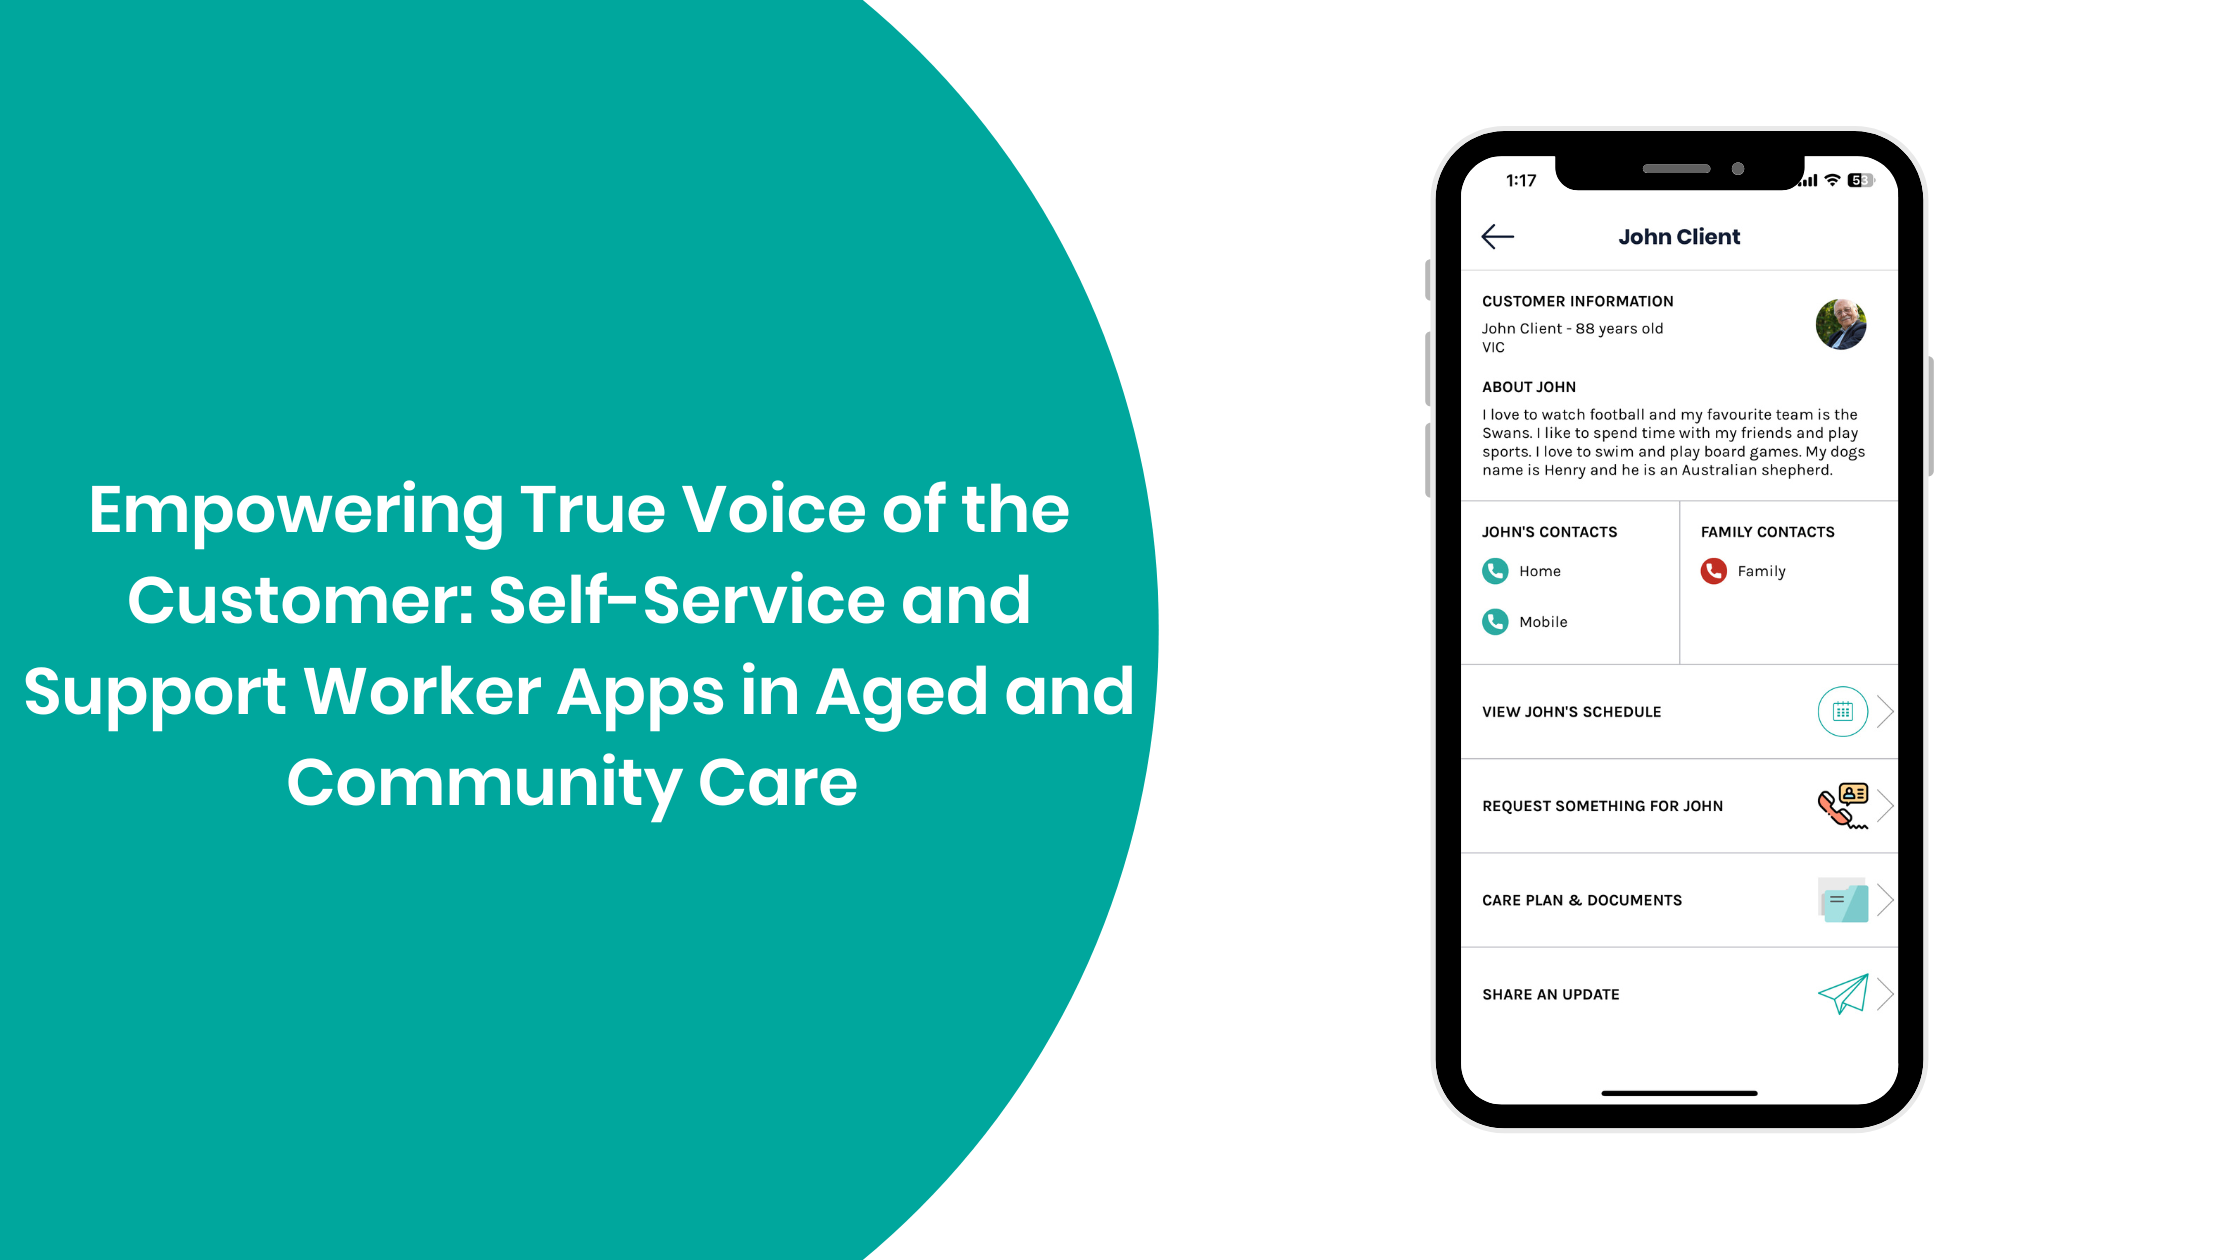 Empowering true voice of the customer Self-service and support worker apps in aged and community care